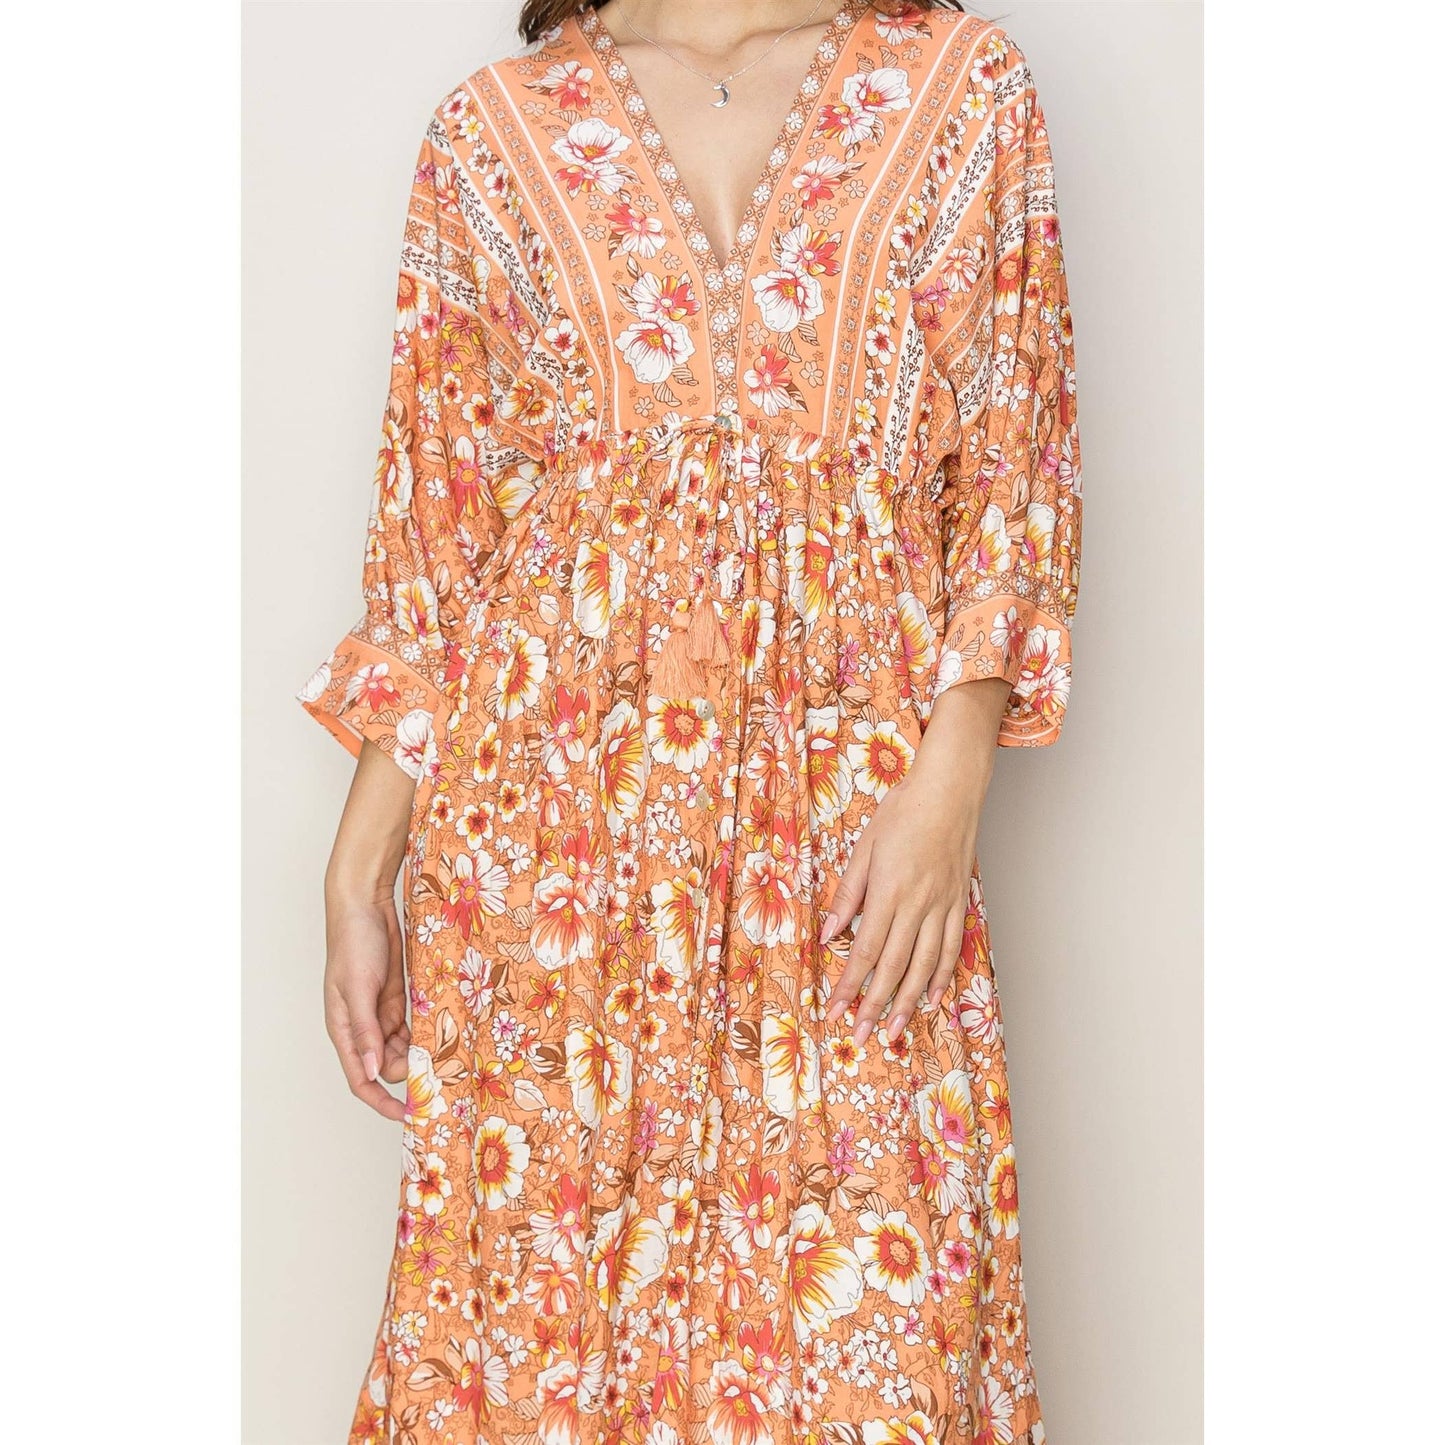 FLORAL PRINT BUTTON-DOWN MAXI DRESS IN APRICOT